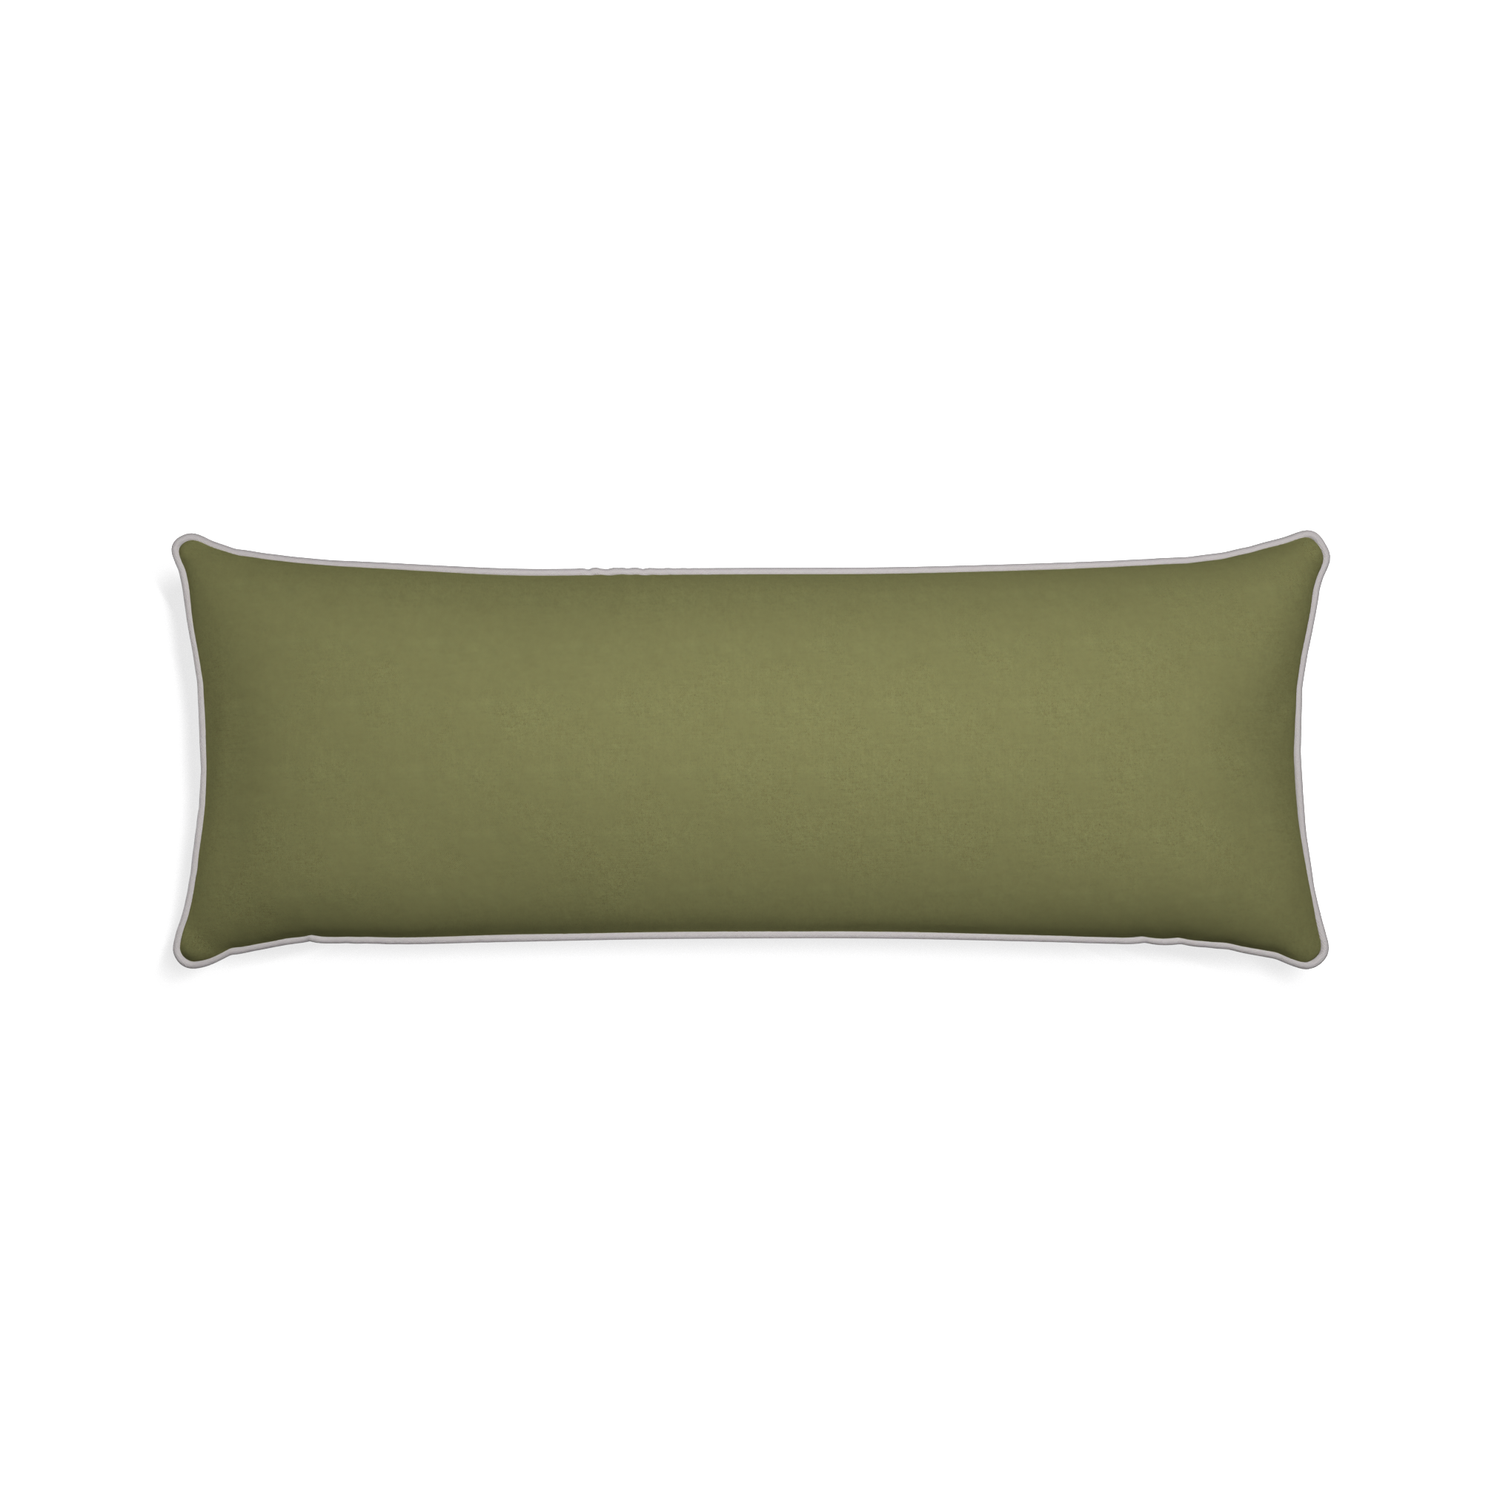 Xl-lumbar moss custom moss greenpillow with pebble piping on white background